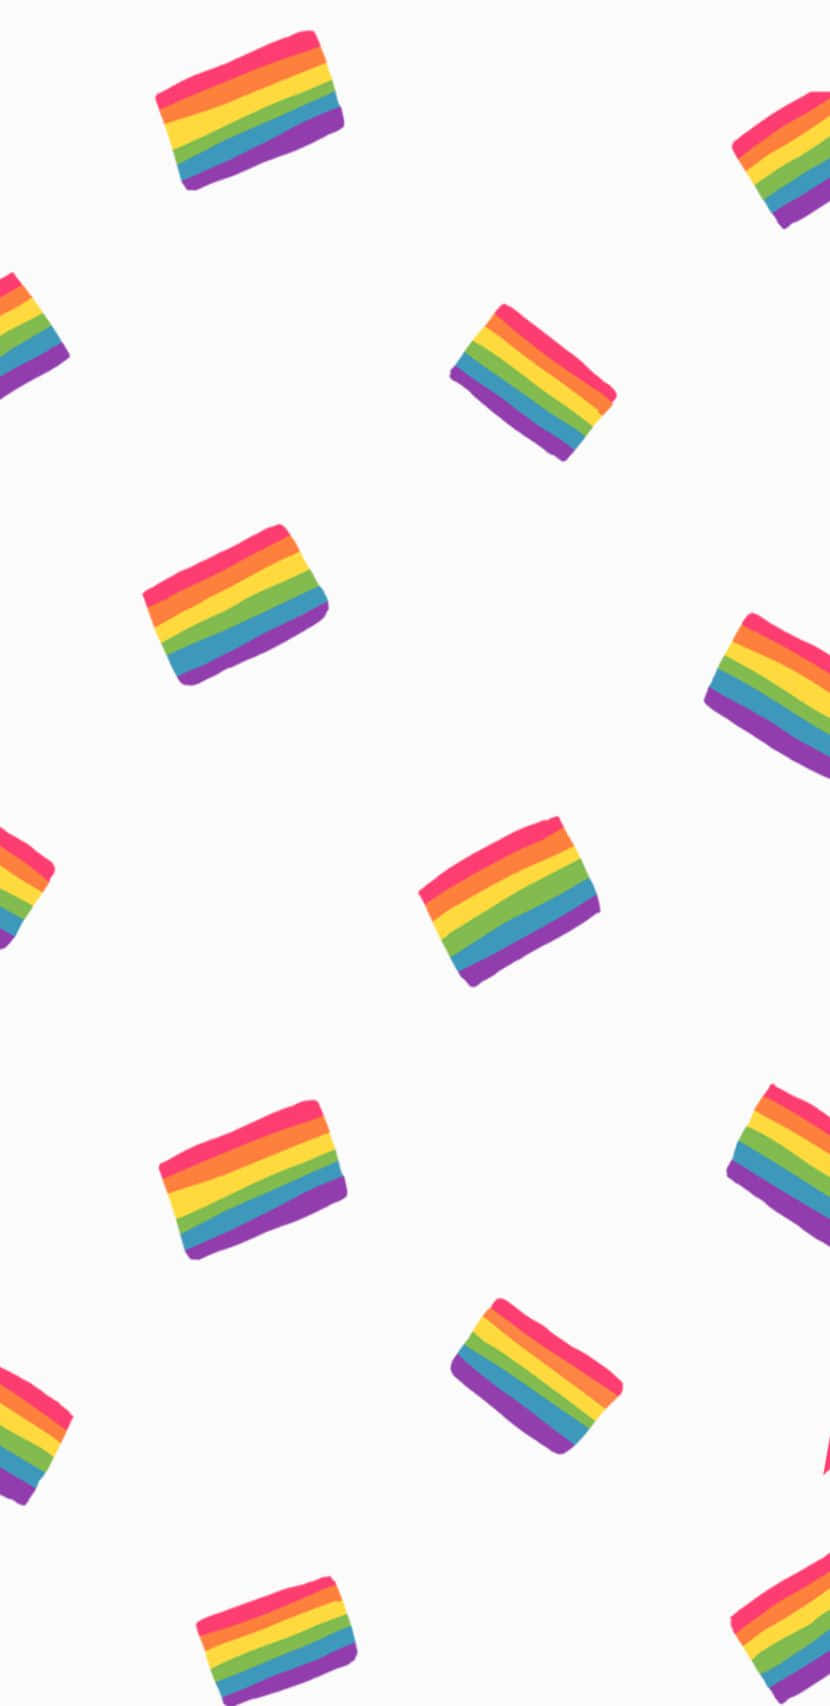 A pattern of rainbow colored rectangles on white - Gay